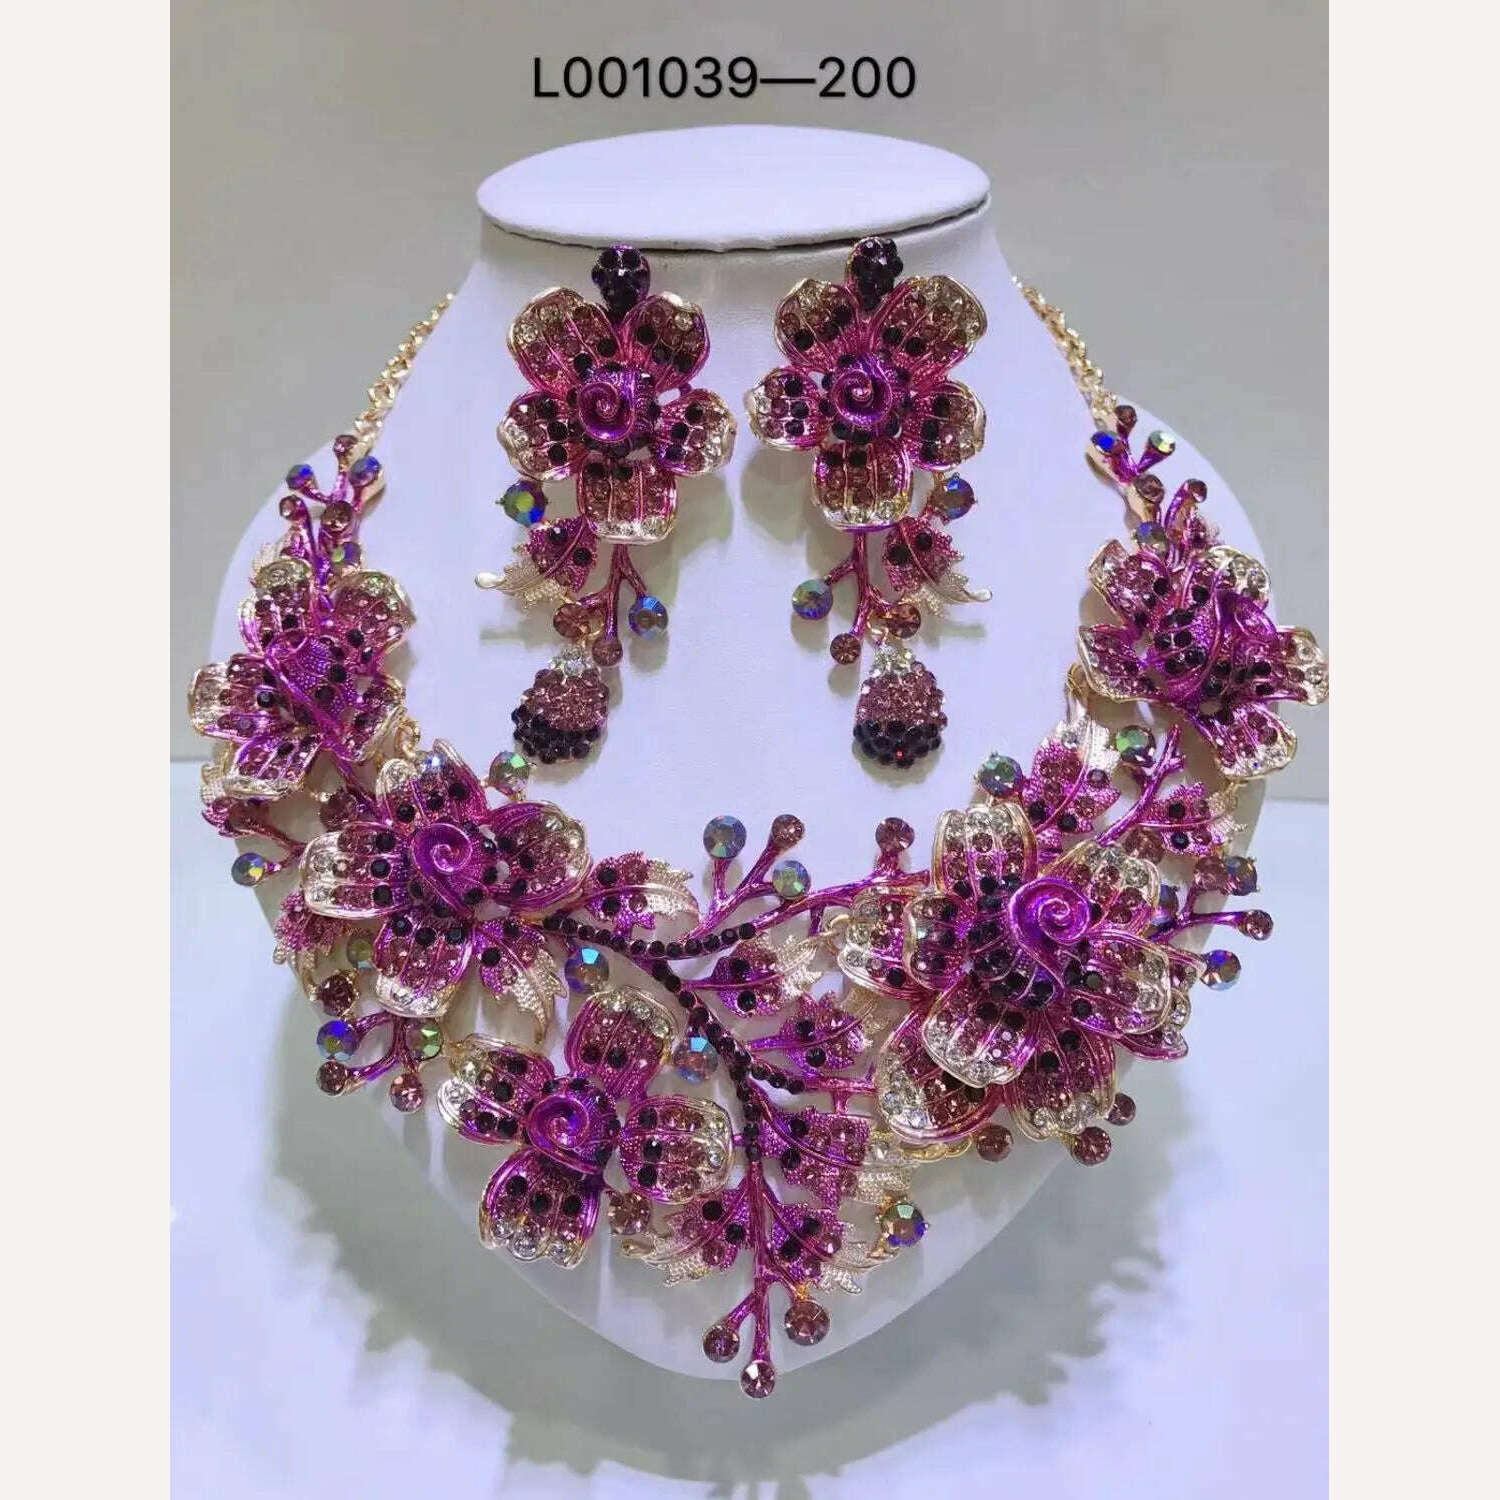 KIMLUD, Elegant Flowers Bridal Jewelry Sets Wedding Costume Necklace & Earrings Sets Shining Crystal Gold Color Jewellery For Brides, L005, KIMLUD Women's Clothes